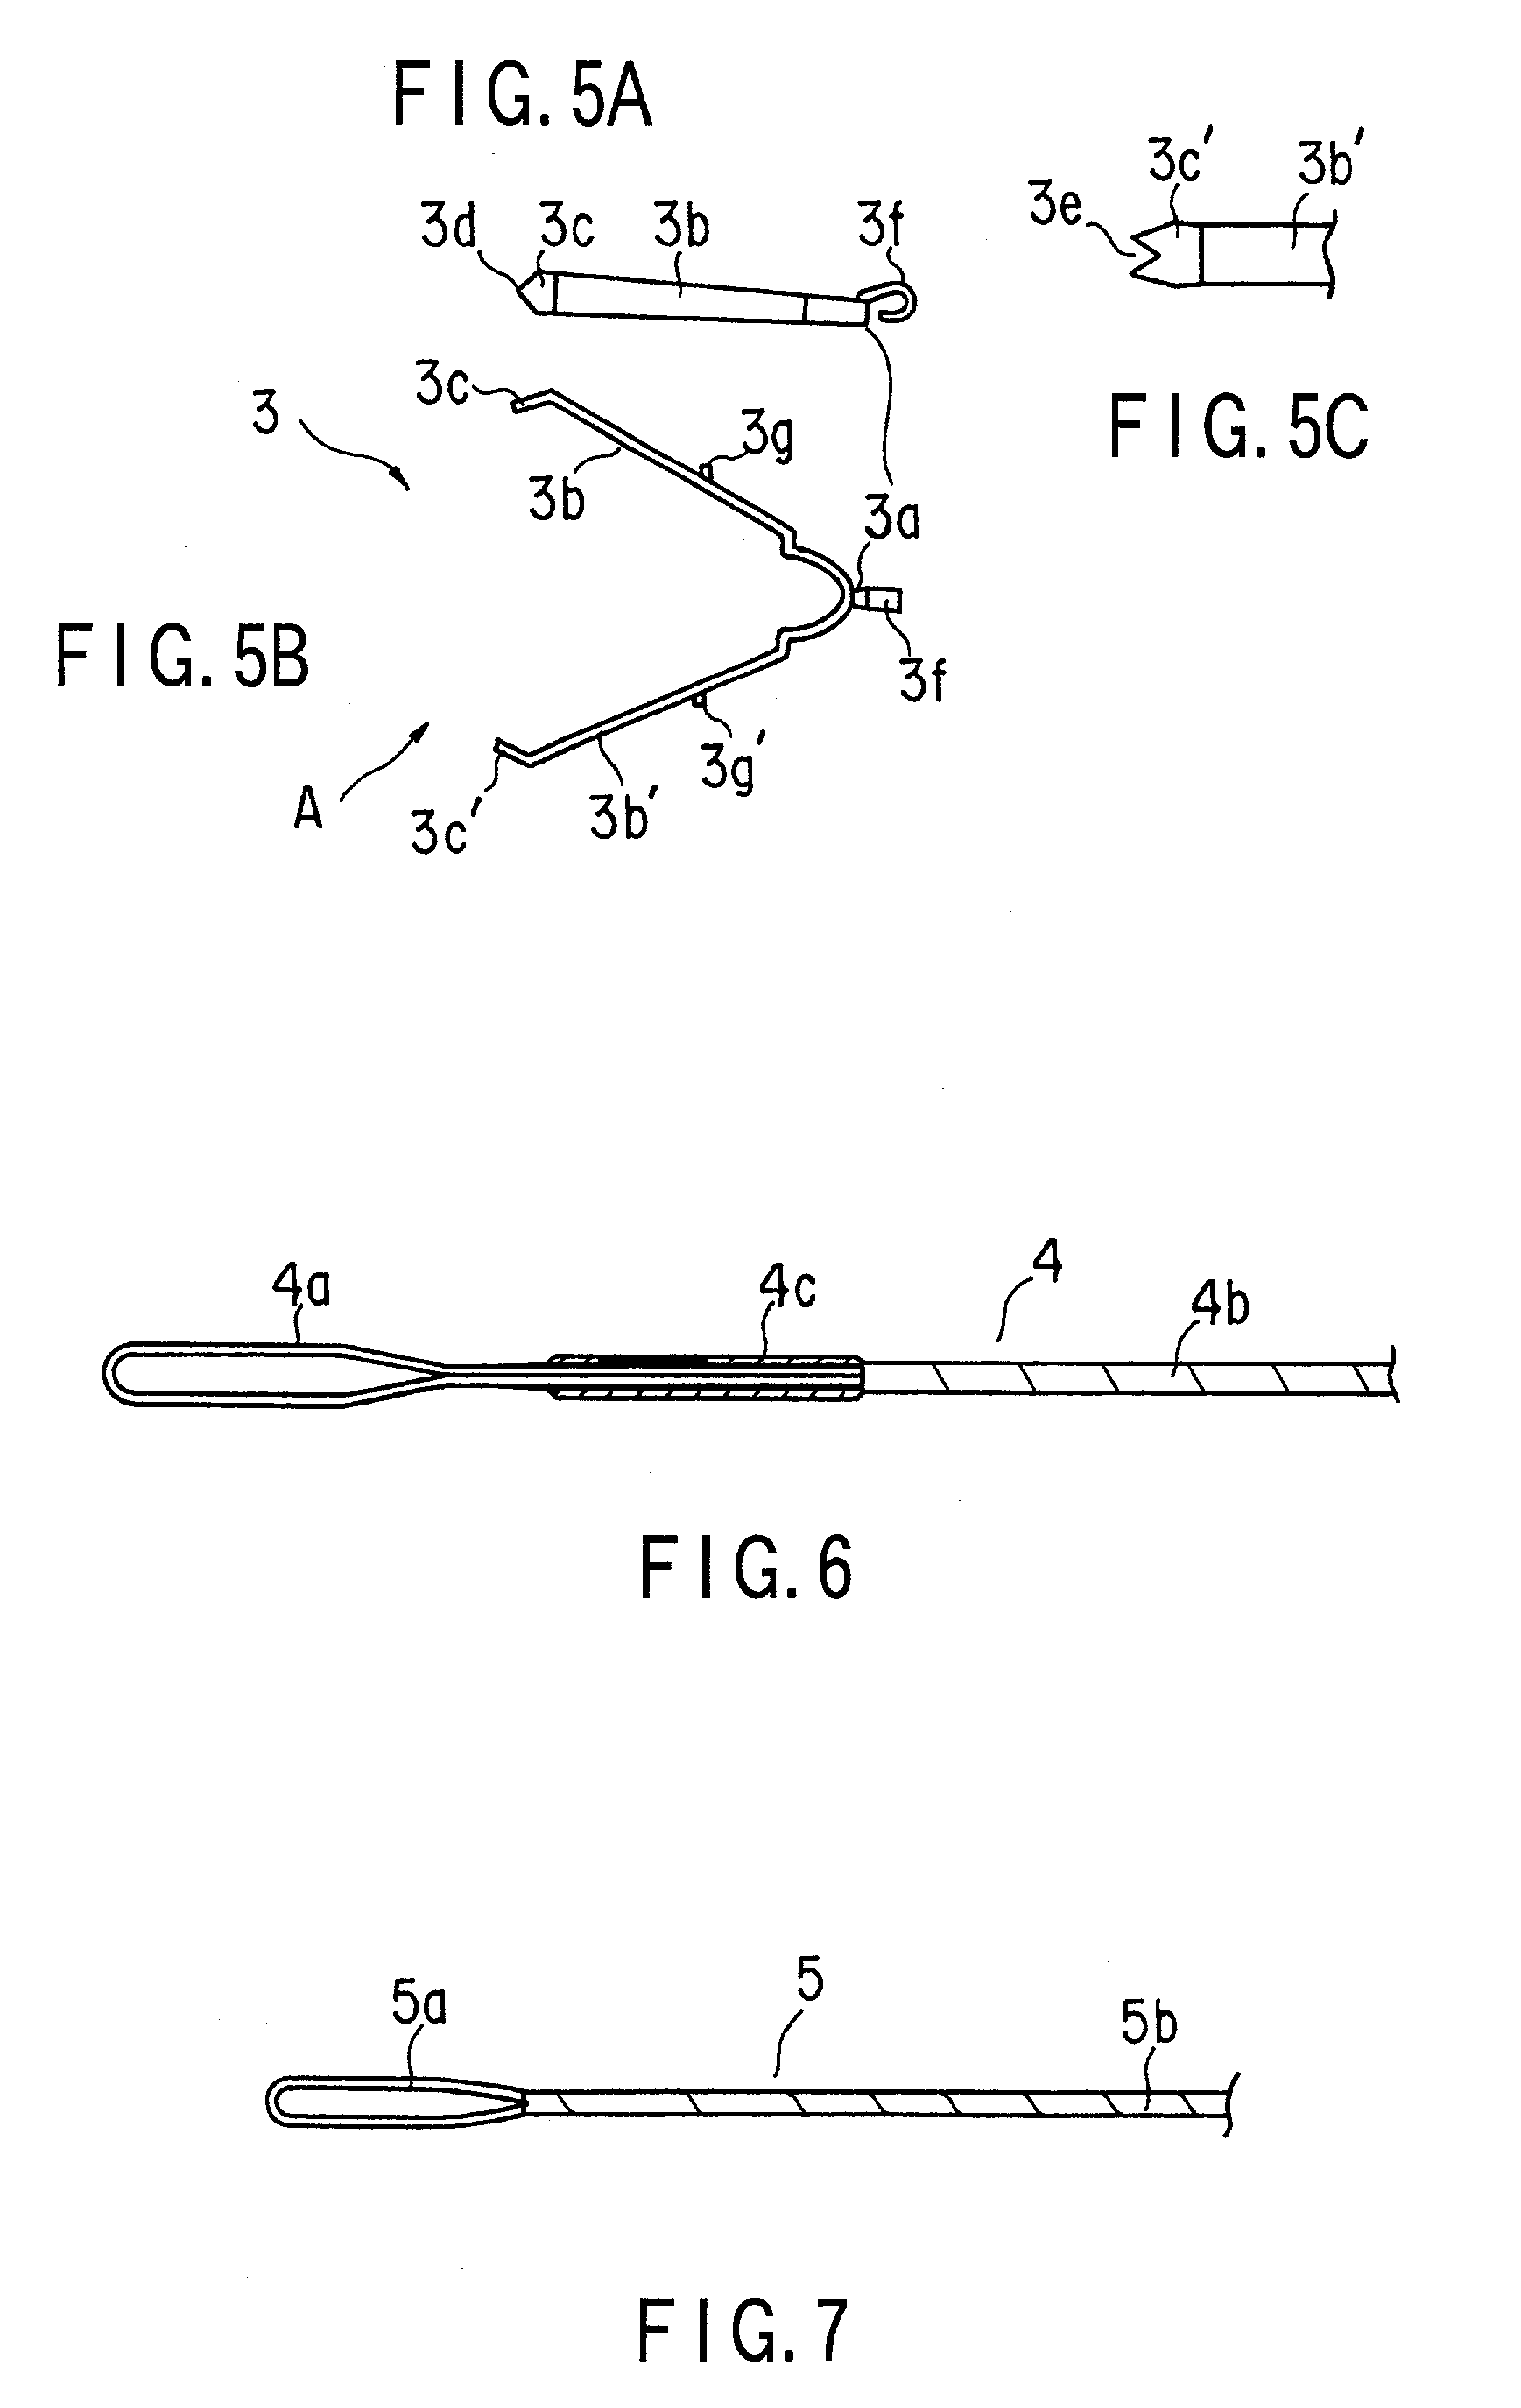 Apparatus for ligating living tissues